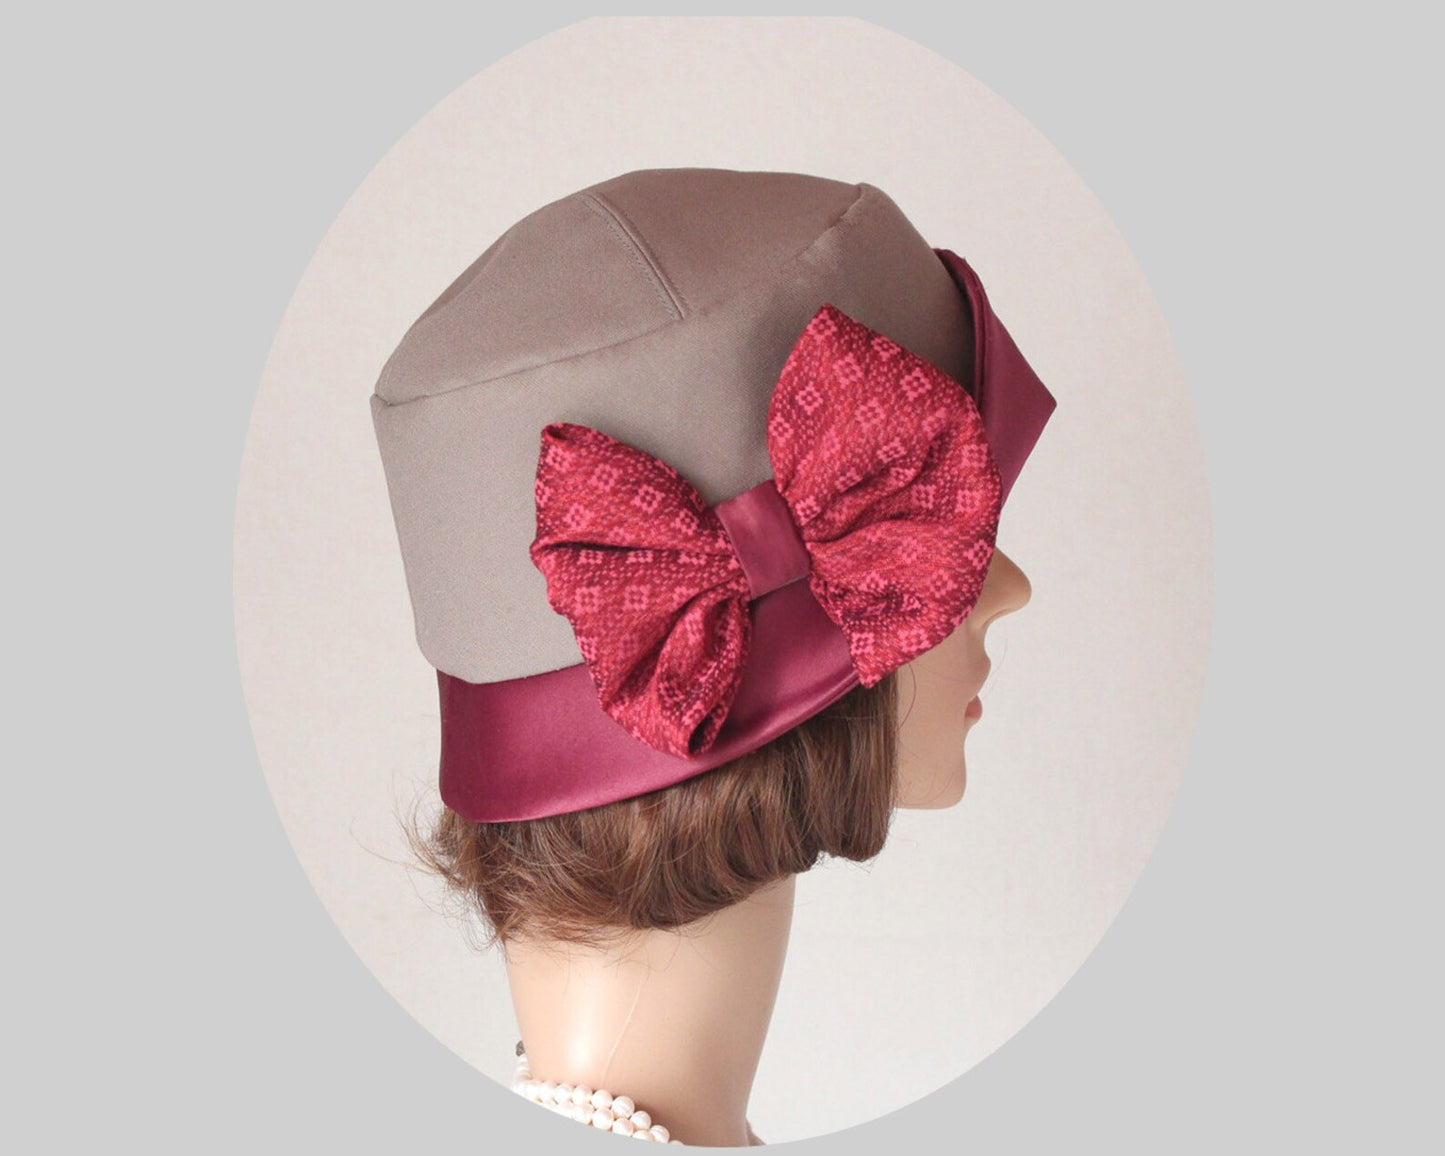 1920s cloche hat in wine red duchess satin and khaki cotton. Can be worn as a Great Gatsby hat, flapper hat or Jazz Age lawn party hat.